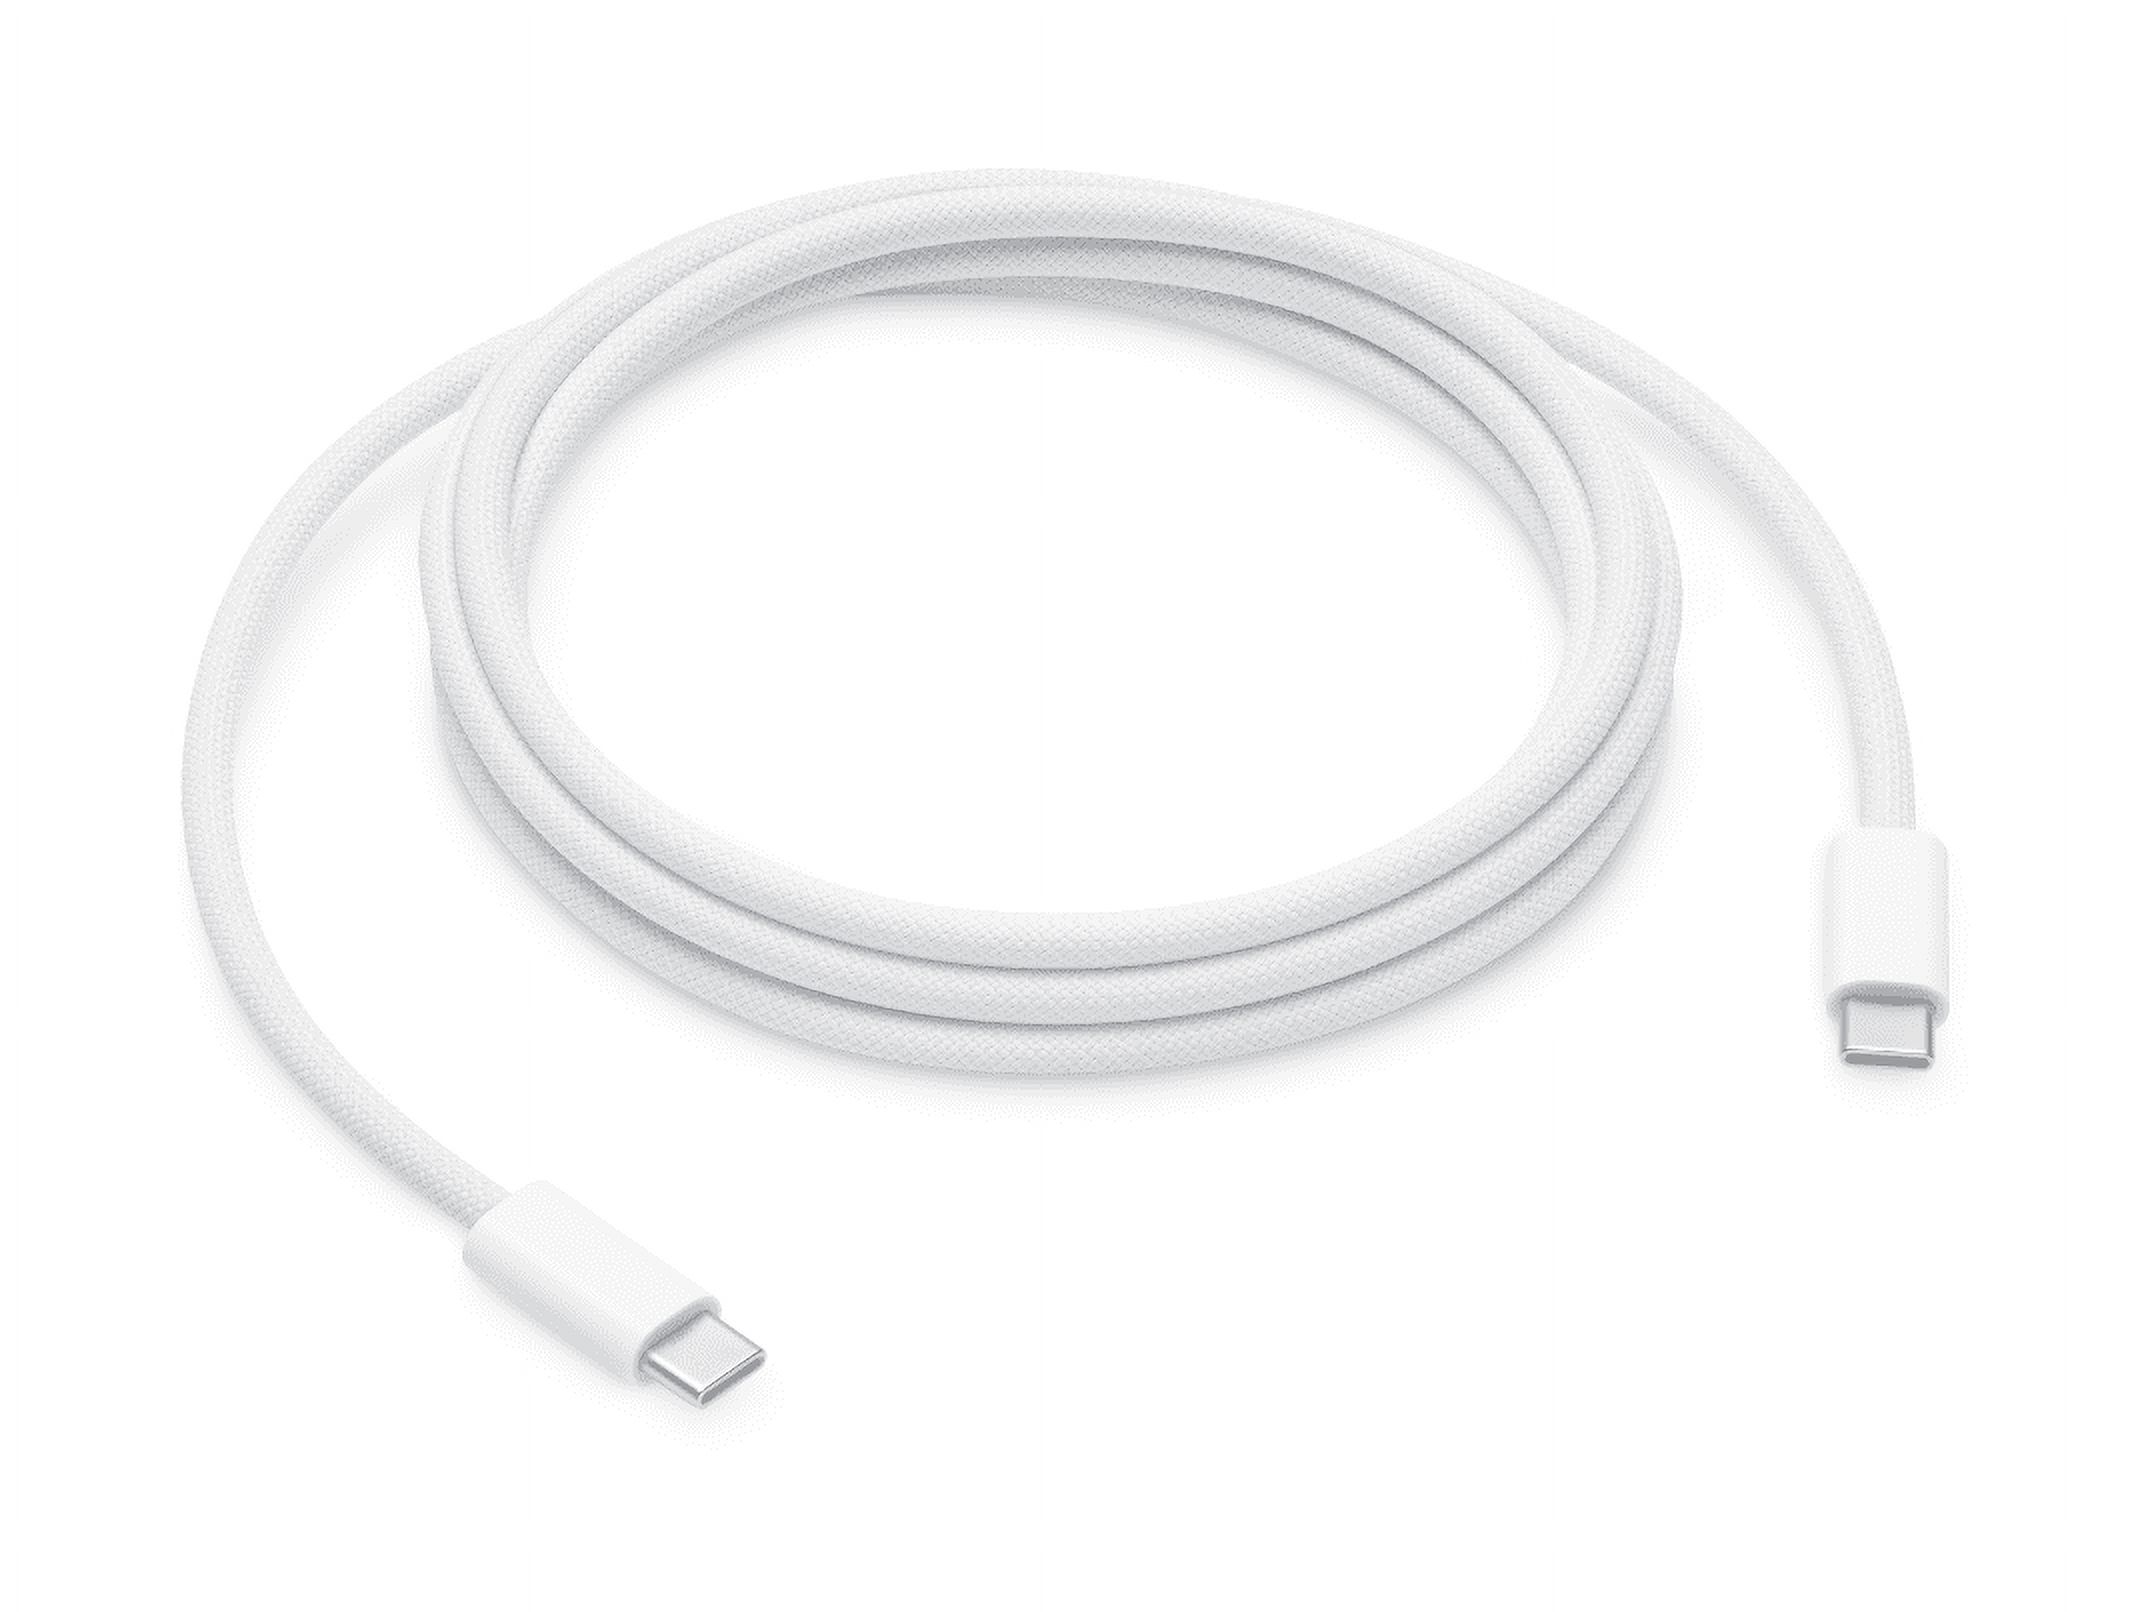 Apple 240w USB-C Charge Cable (2m) - image 1 of 3